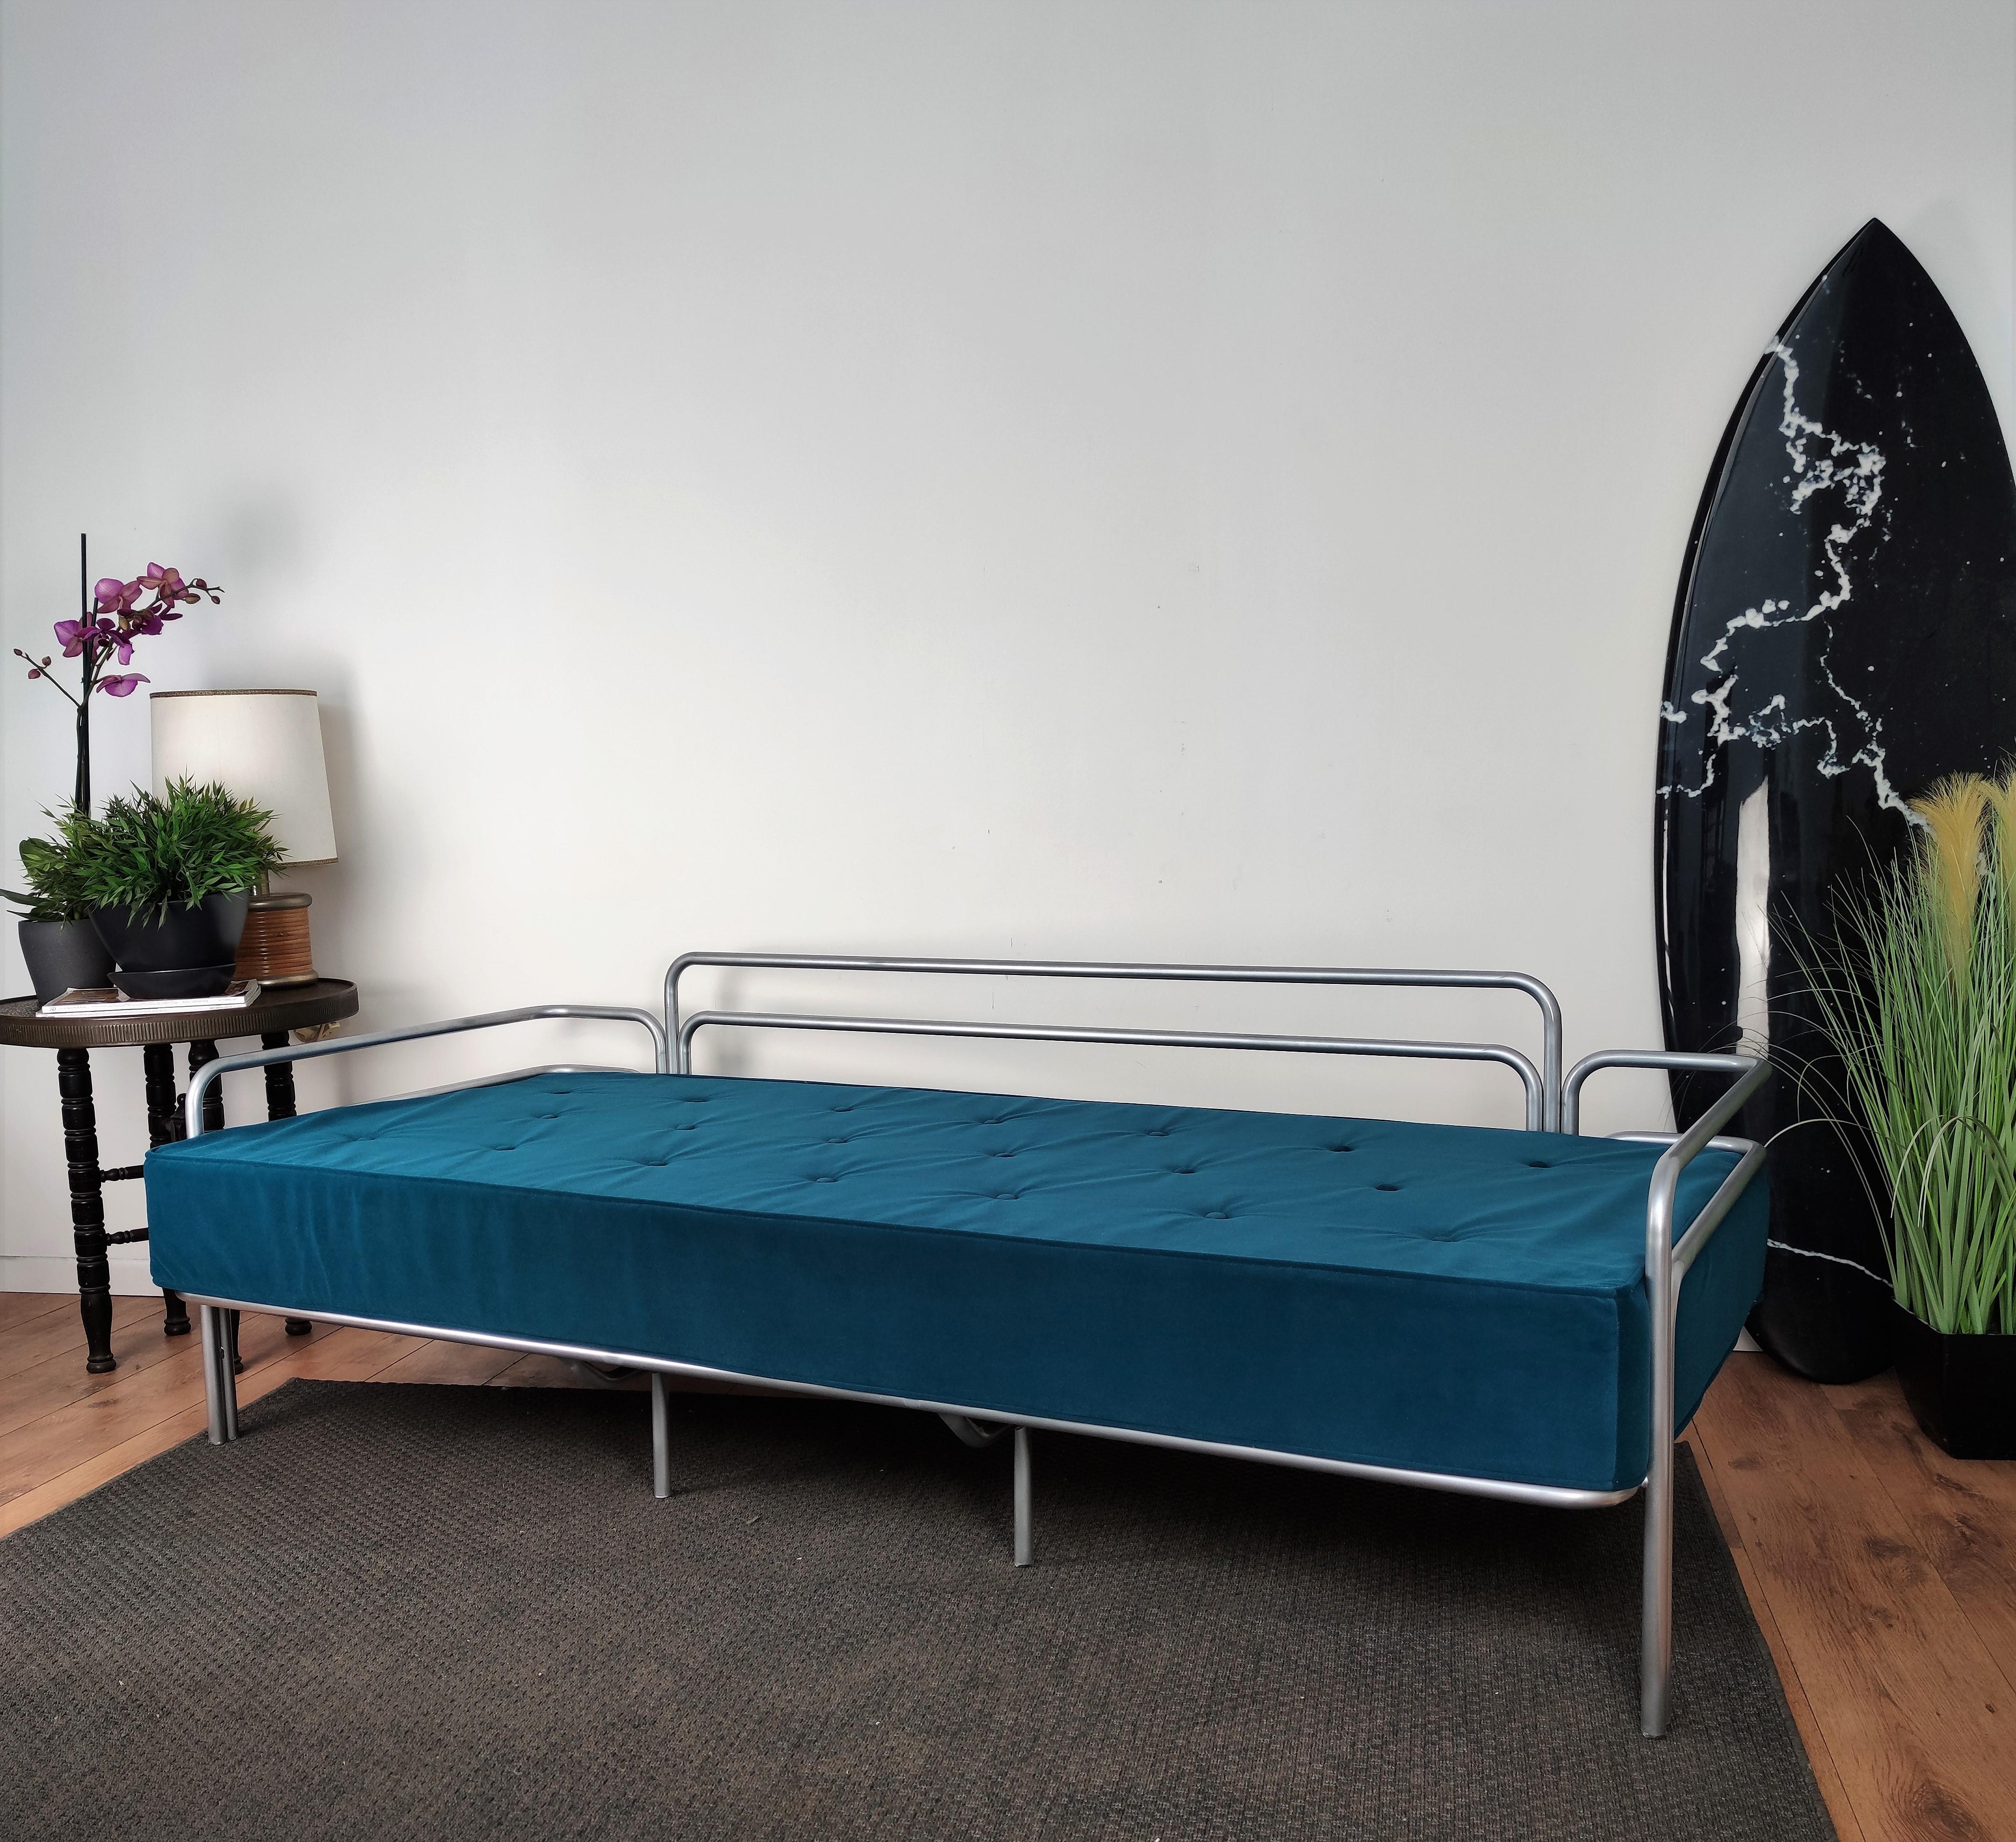 1960s Italian Steel and Tufted Velvet Blue Re-Upholstered Sofa or Daybed For Sale 3